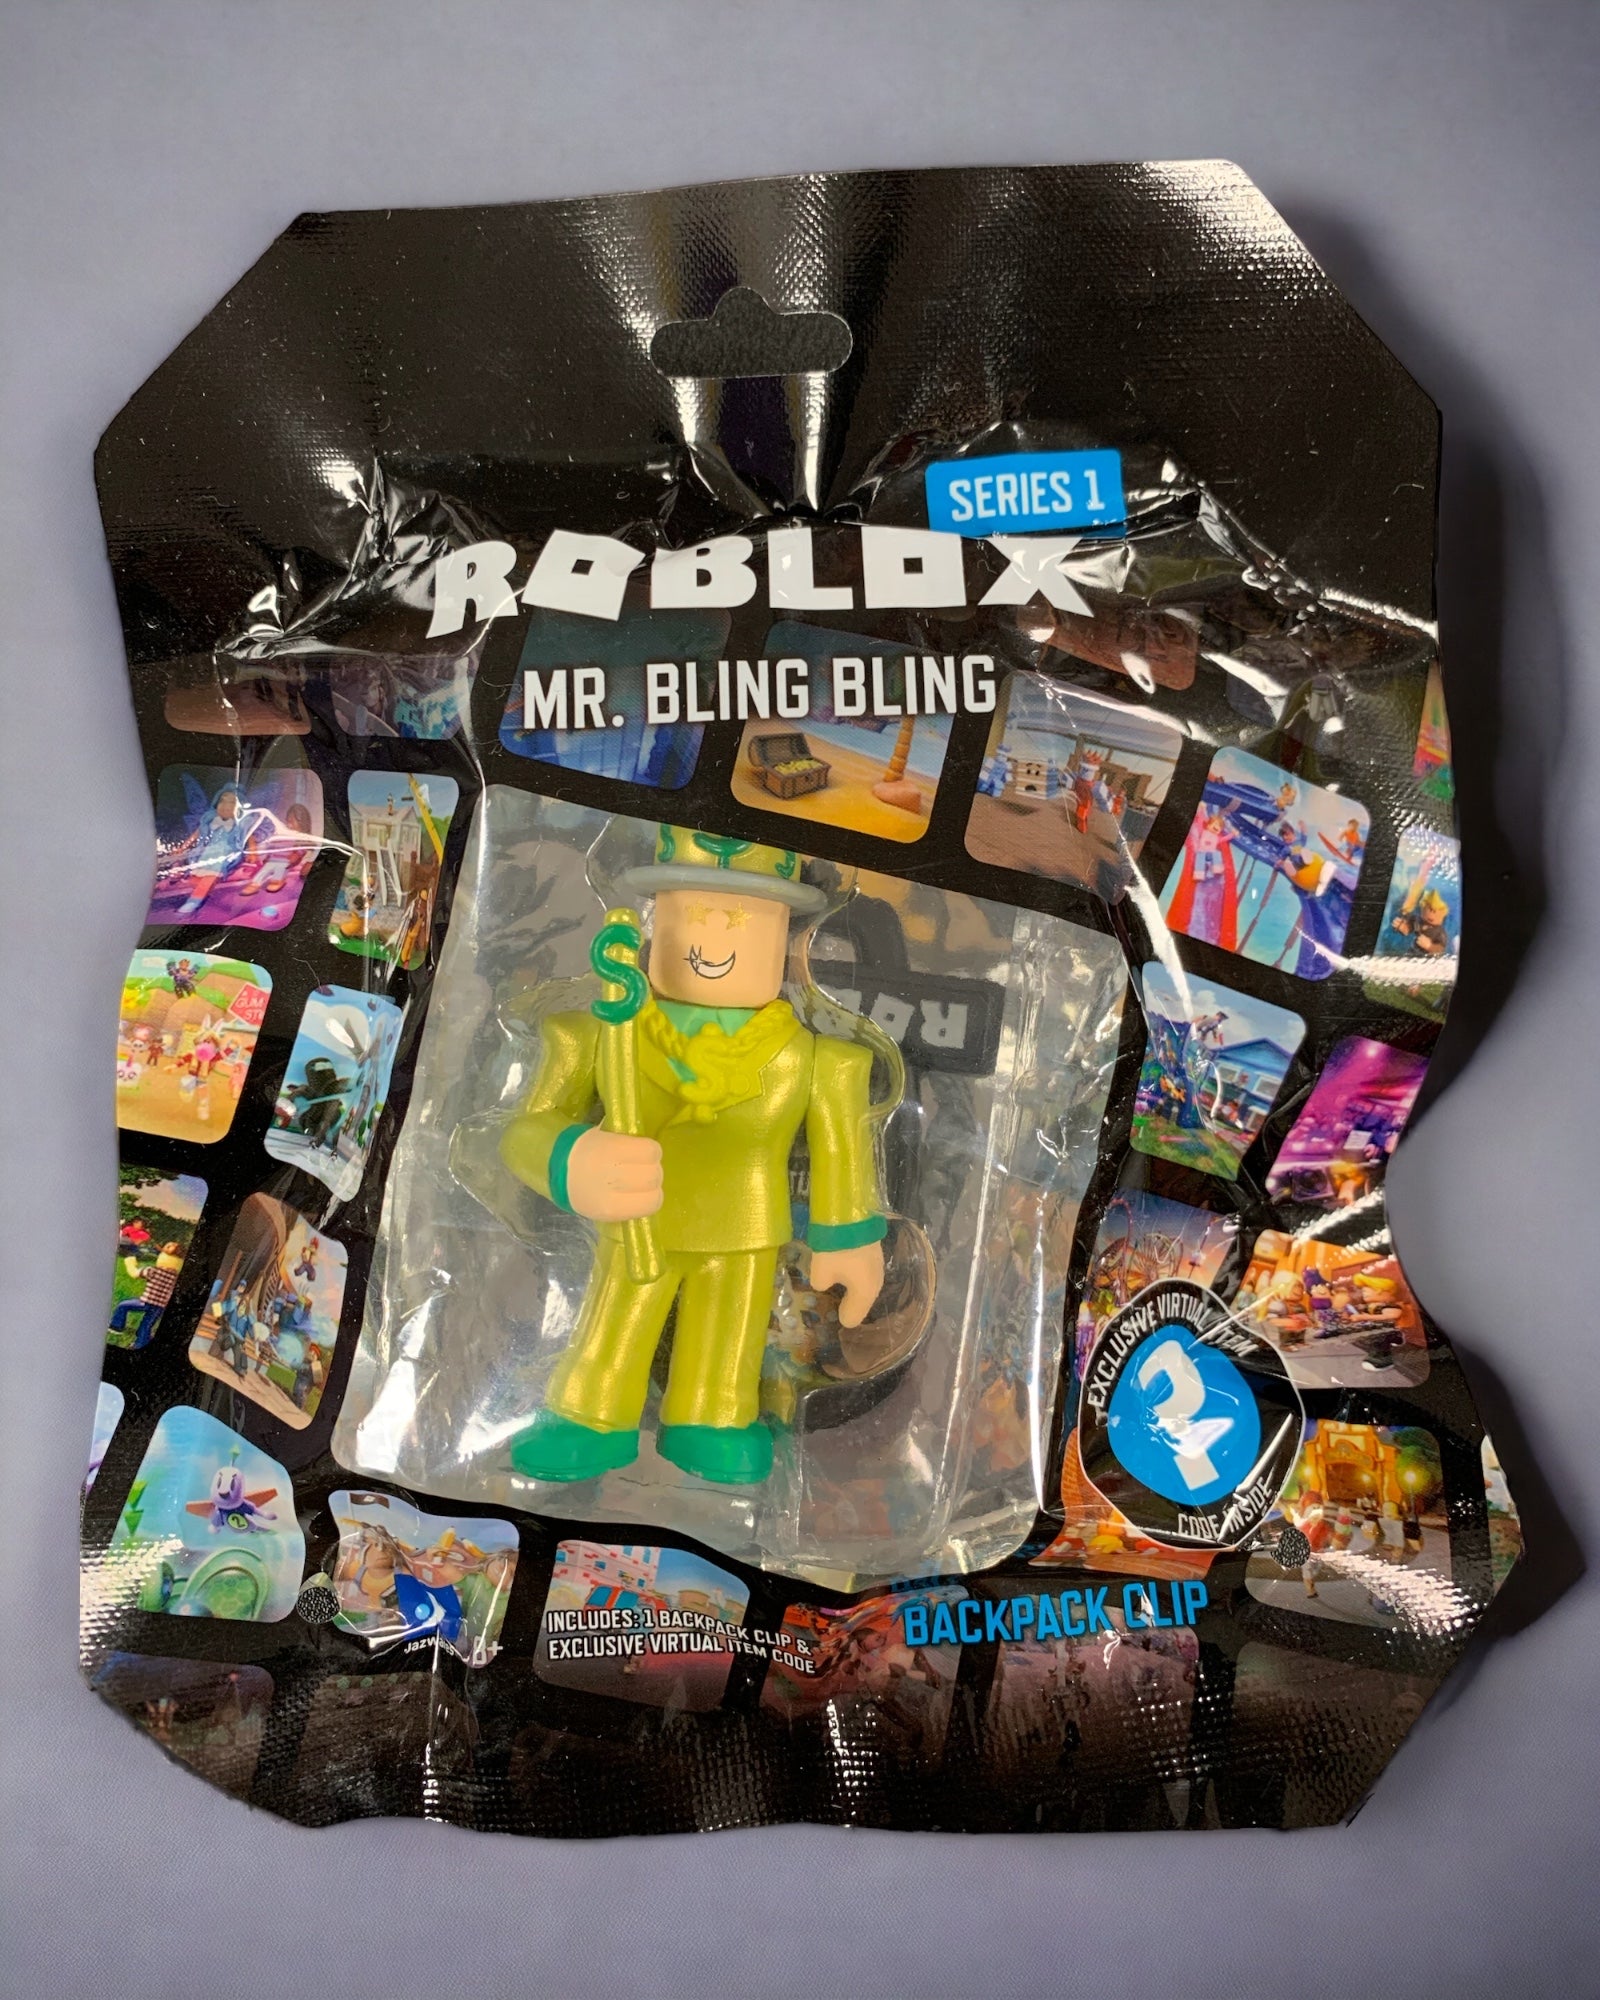 Roblox Series 1 Backpack Hangers - Mr. Bling Bling - Includes mystery virtual item